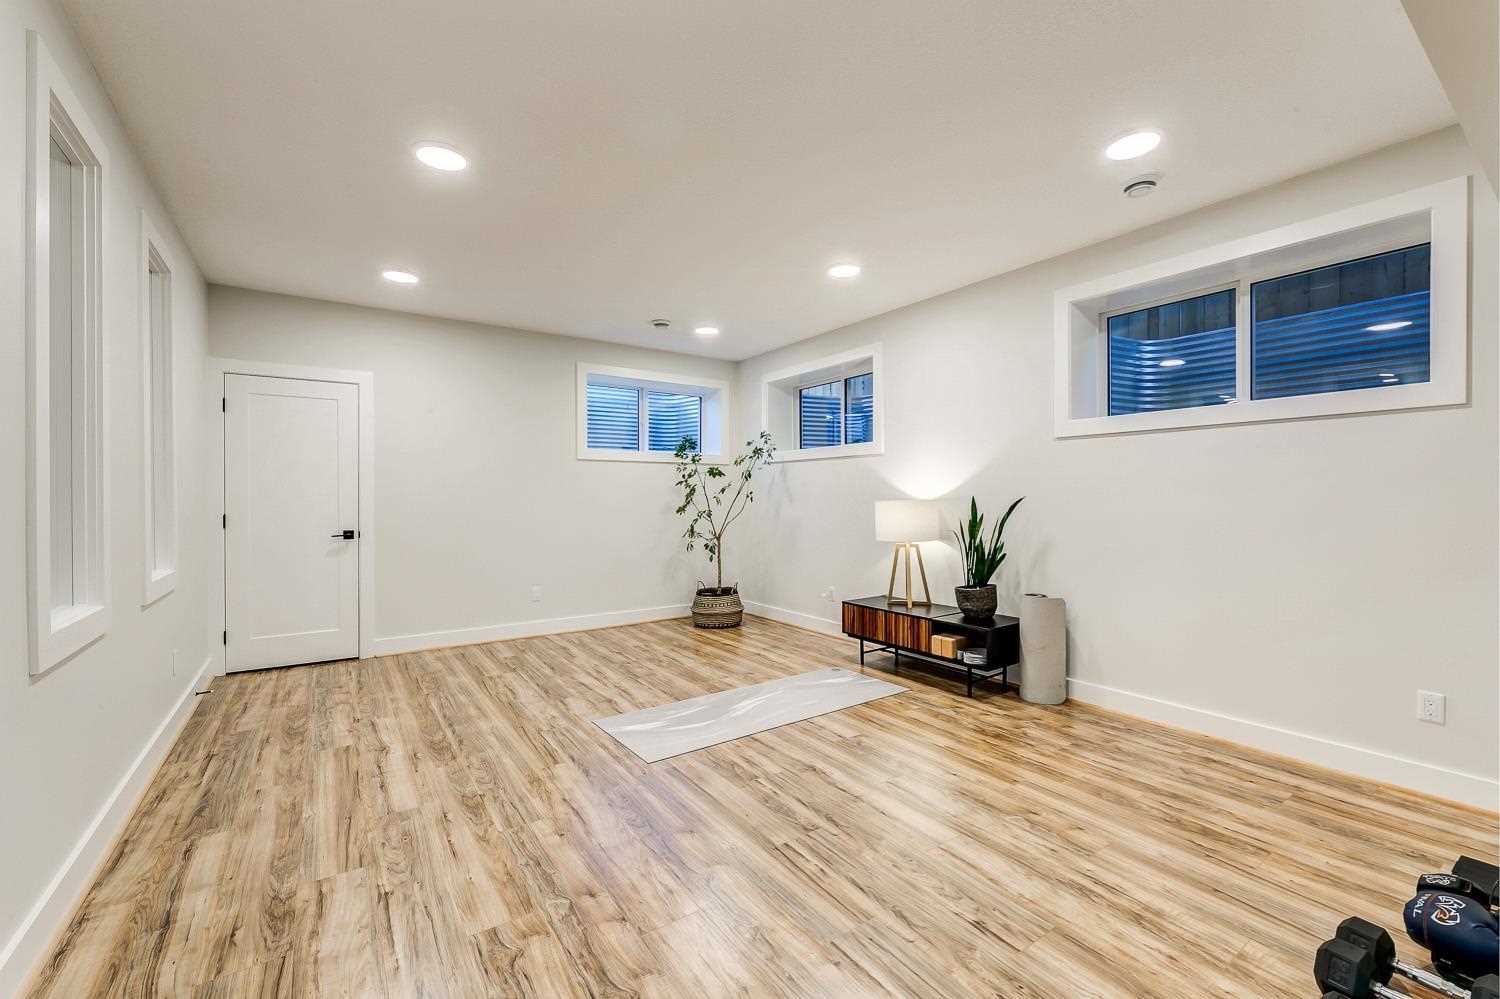 Basement yoga studio with white ceiling and walls, light hardwood floor and a white yoga mat; small table against wall with lamp and plant on top; three ground-level windows on the middle and right; plant in the corner